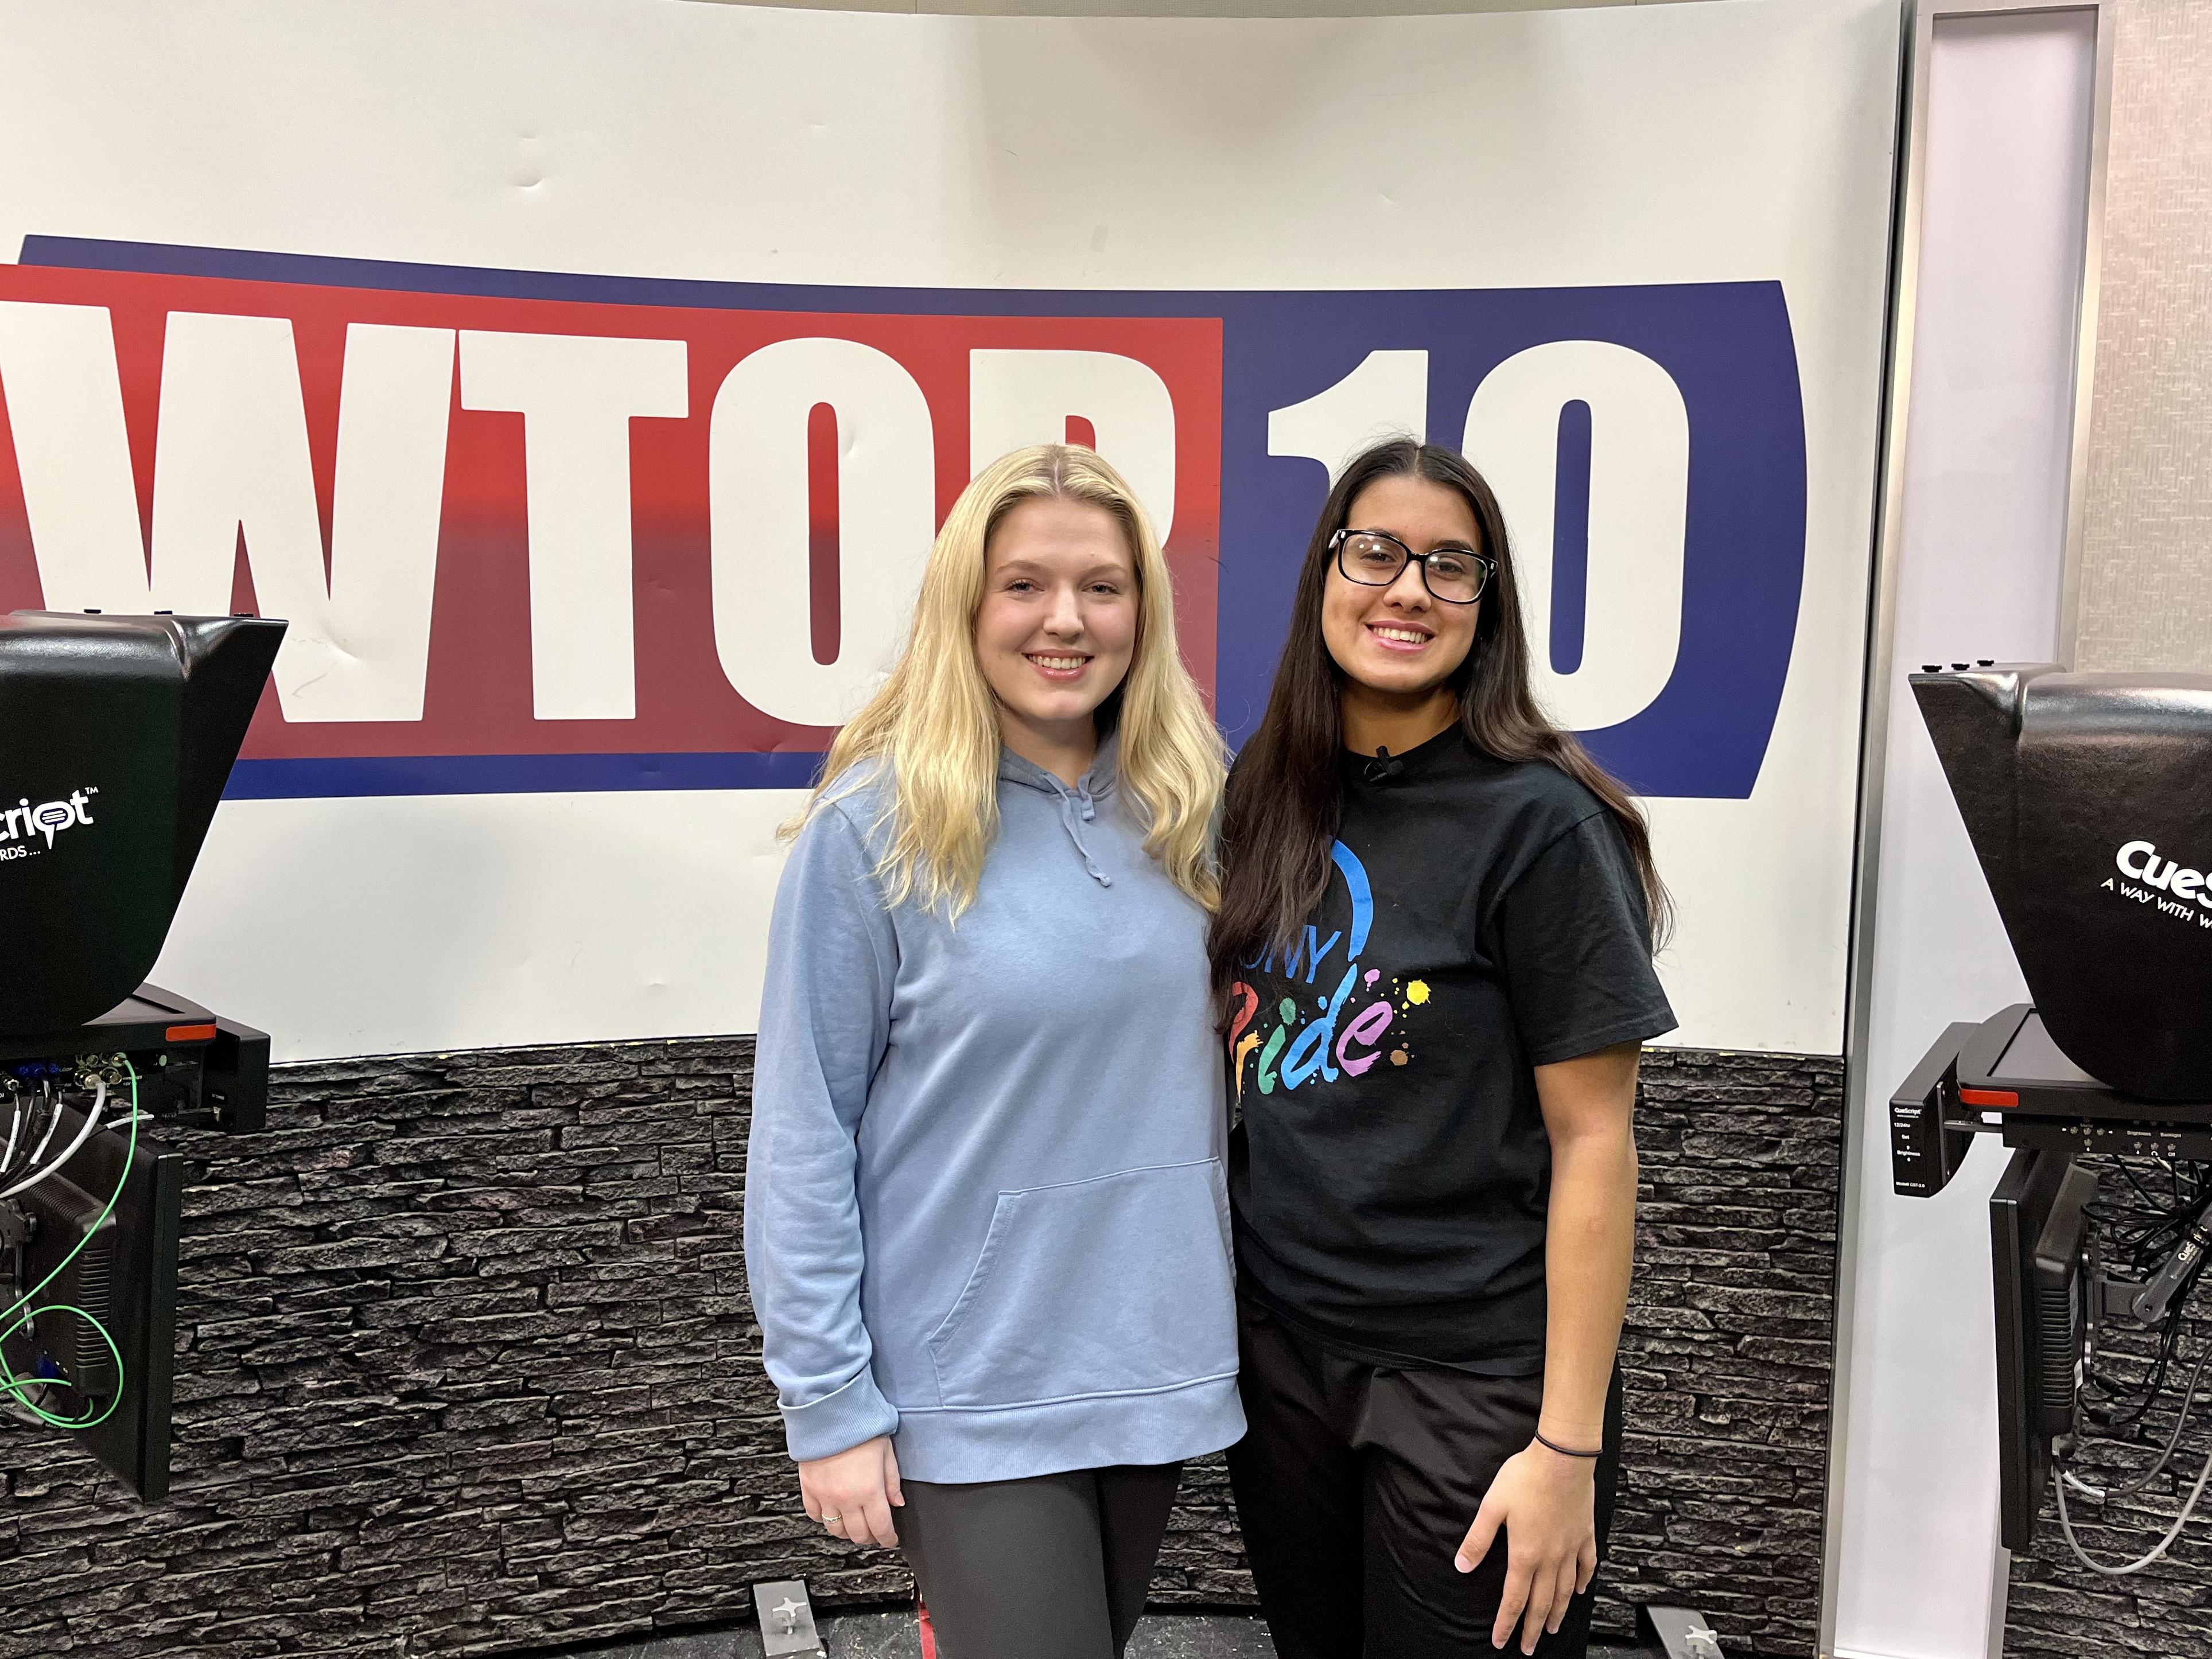 Co-producers Natalie Barden (left) and Jolie Santiago (right) stand in the WTOP studio ahead of the first ever all-female WTOP sports broadcast.